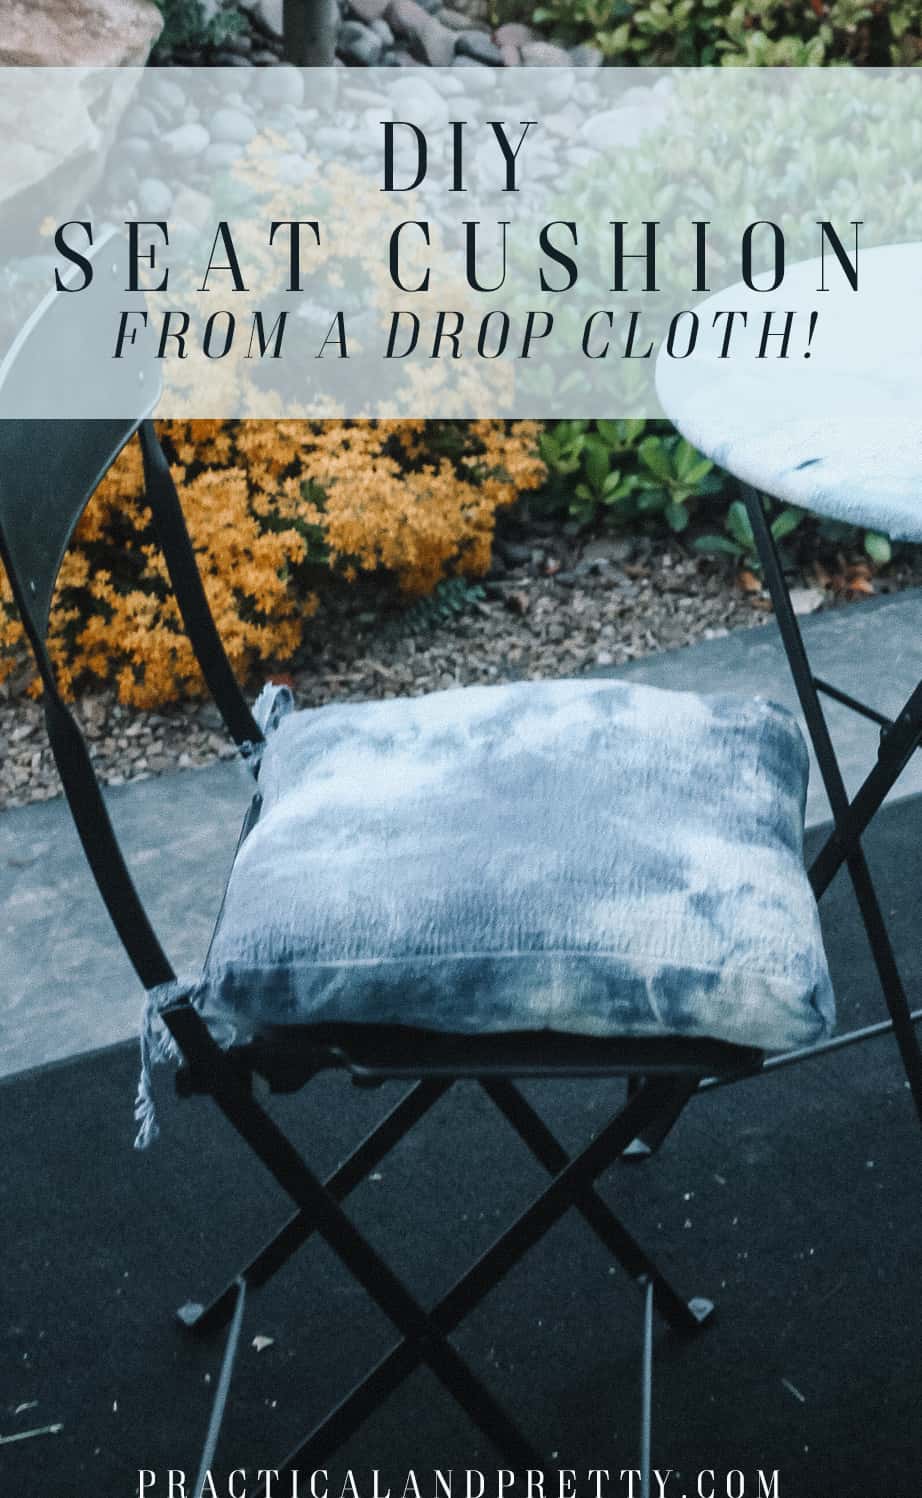 Use a drop cloth to make a cushions for your patio set or bistro set. I use some indigo dye to create this unique and trendy look.